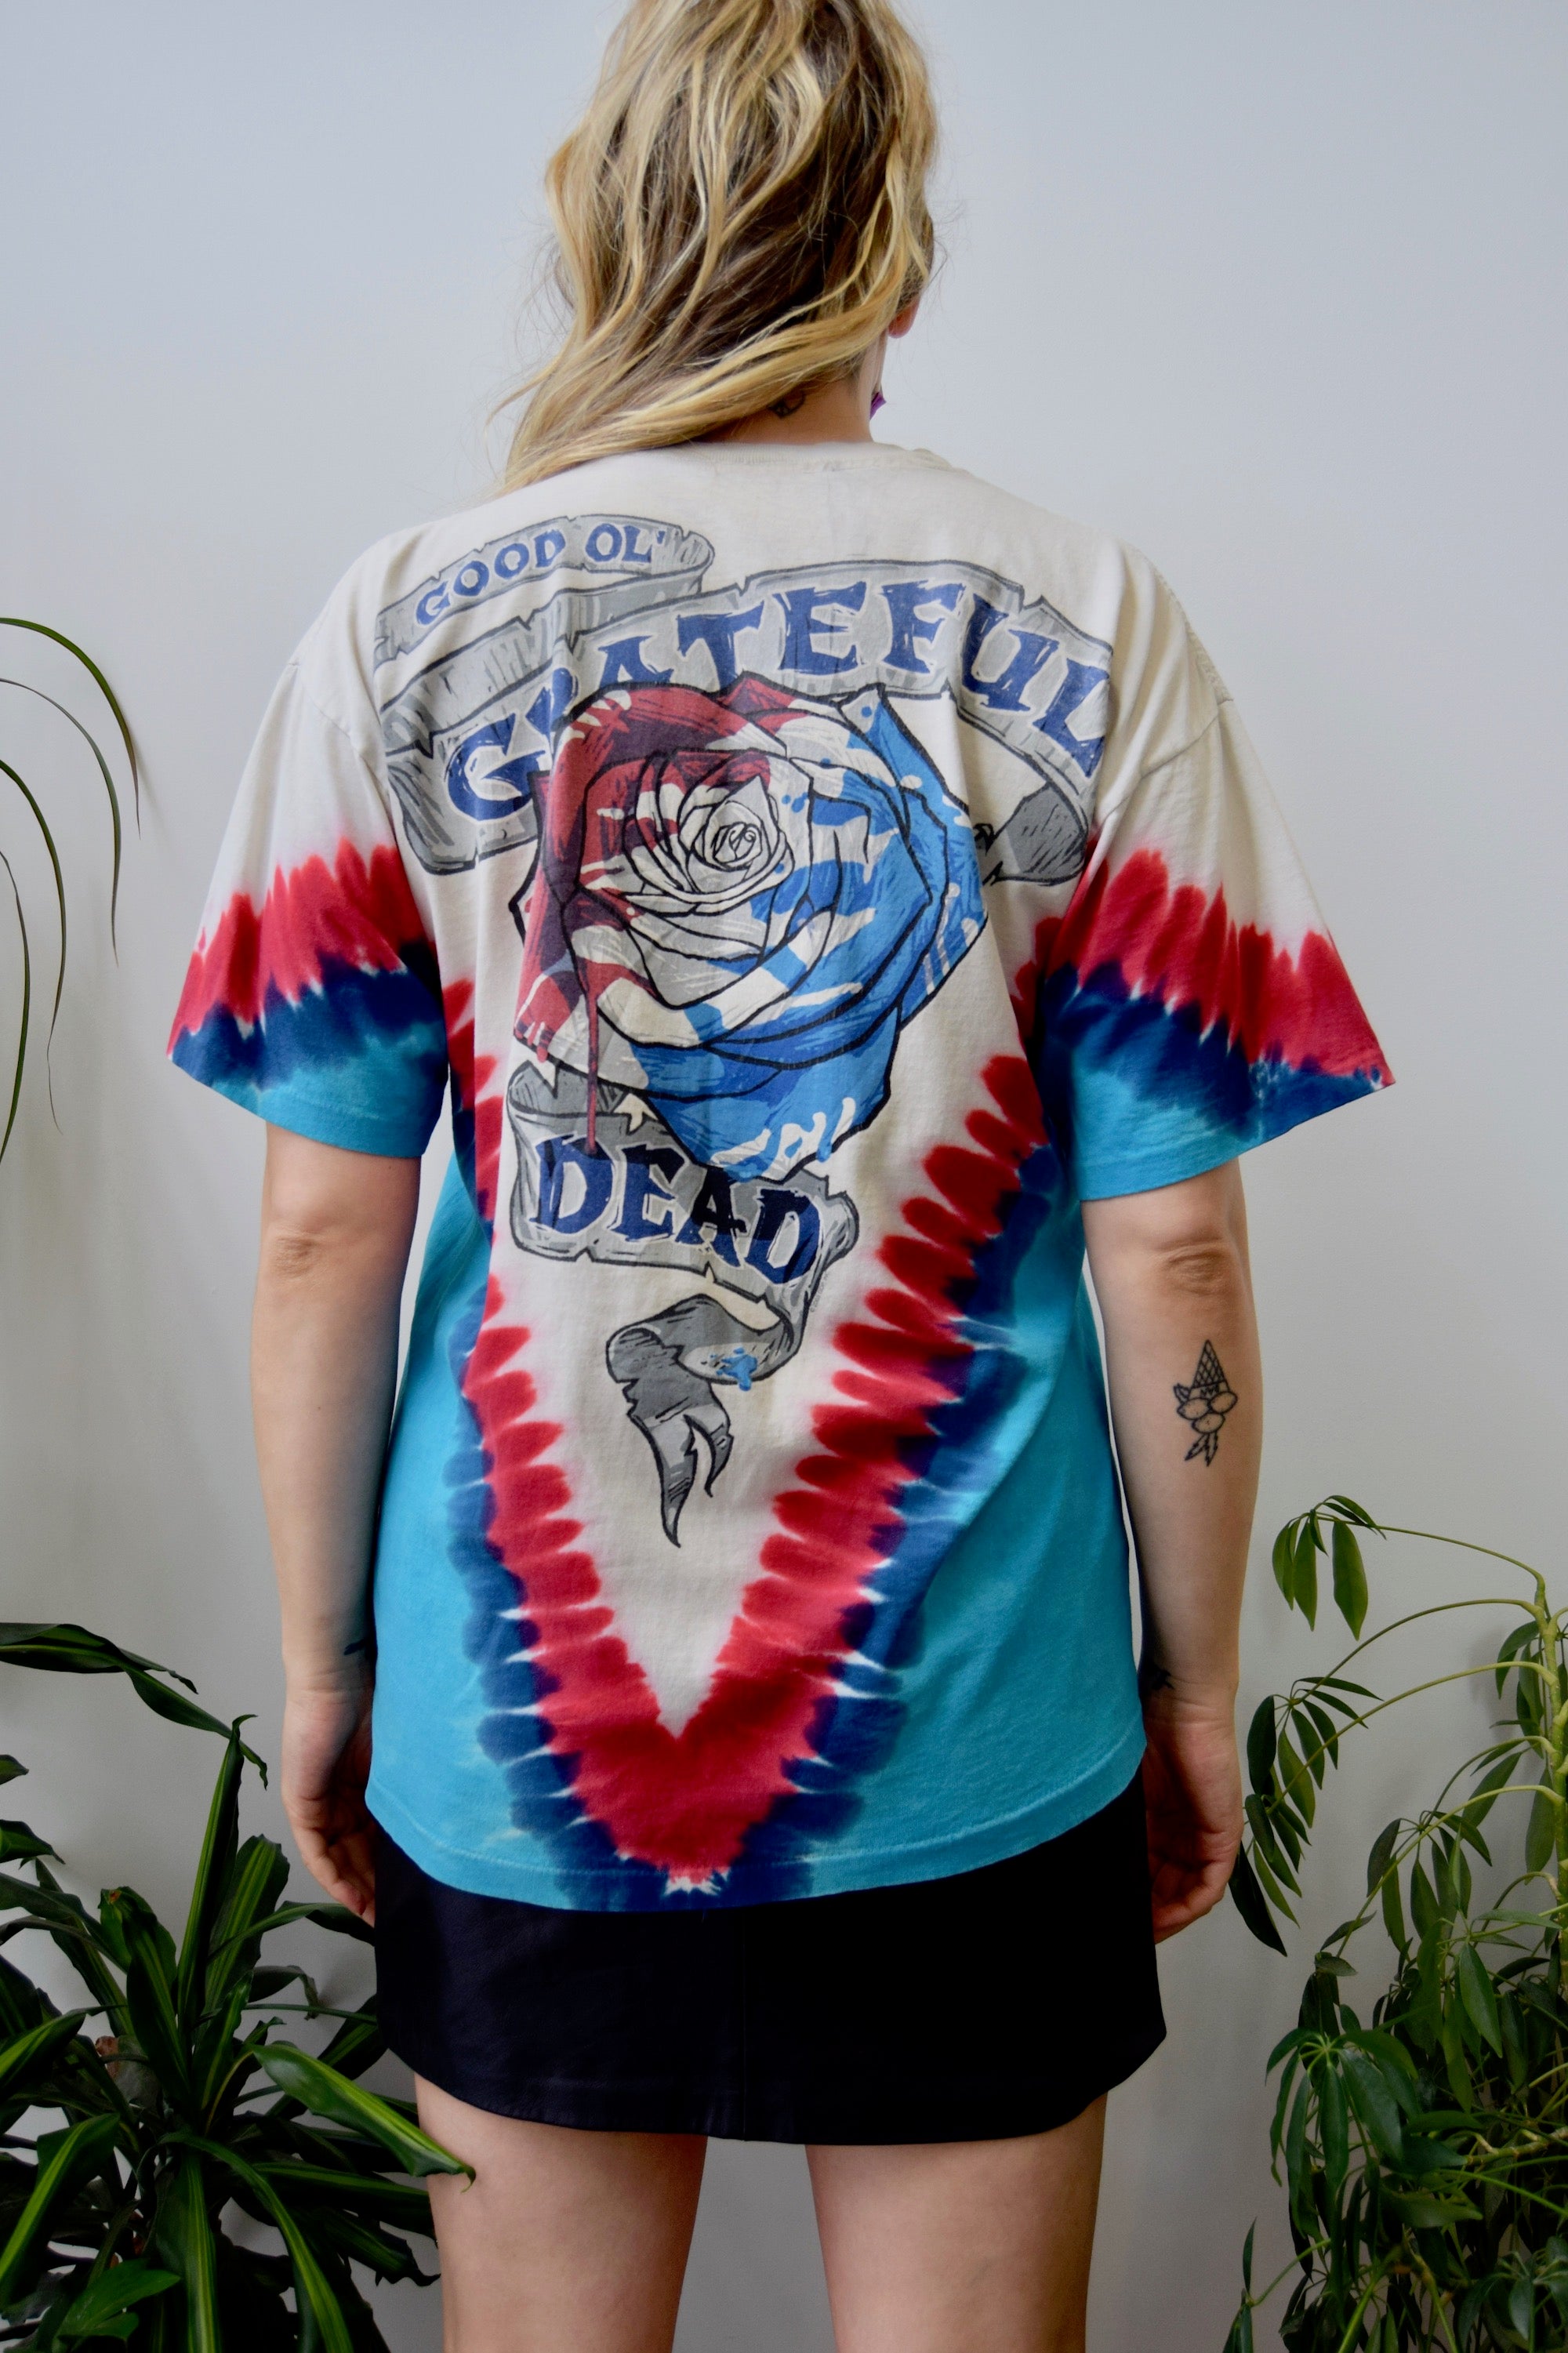 Steal Your Face Grateful Dead Tee